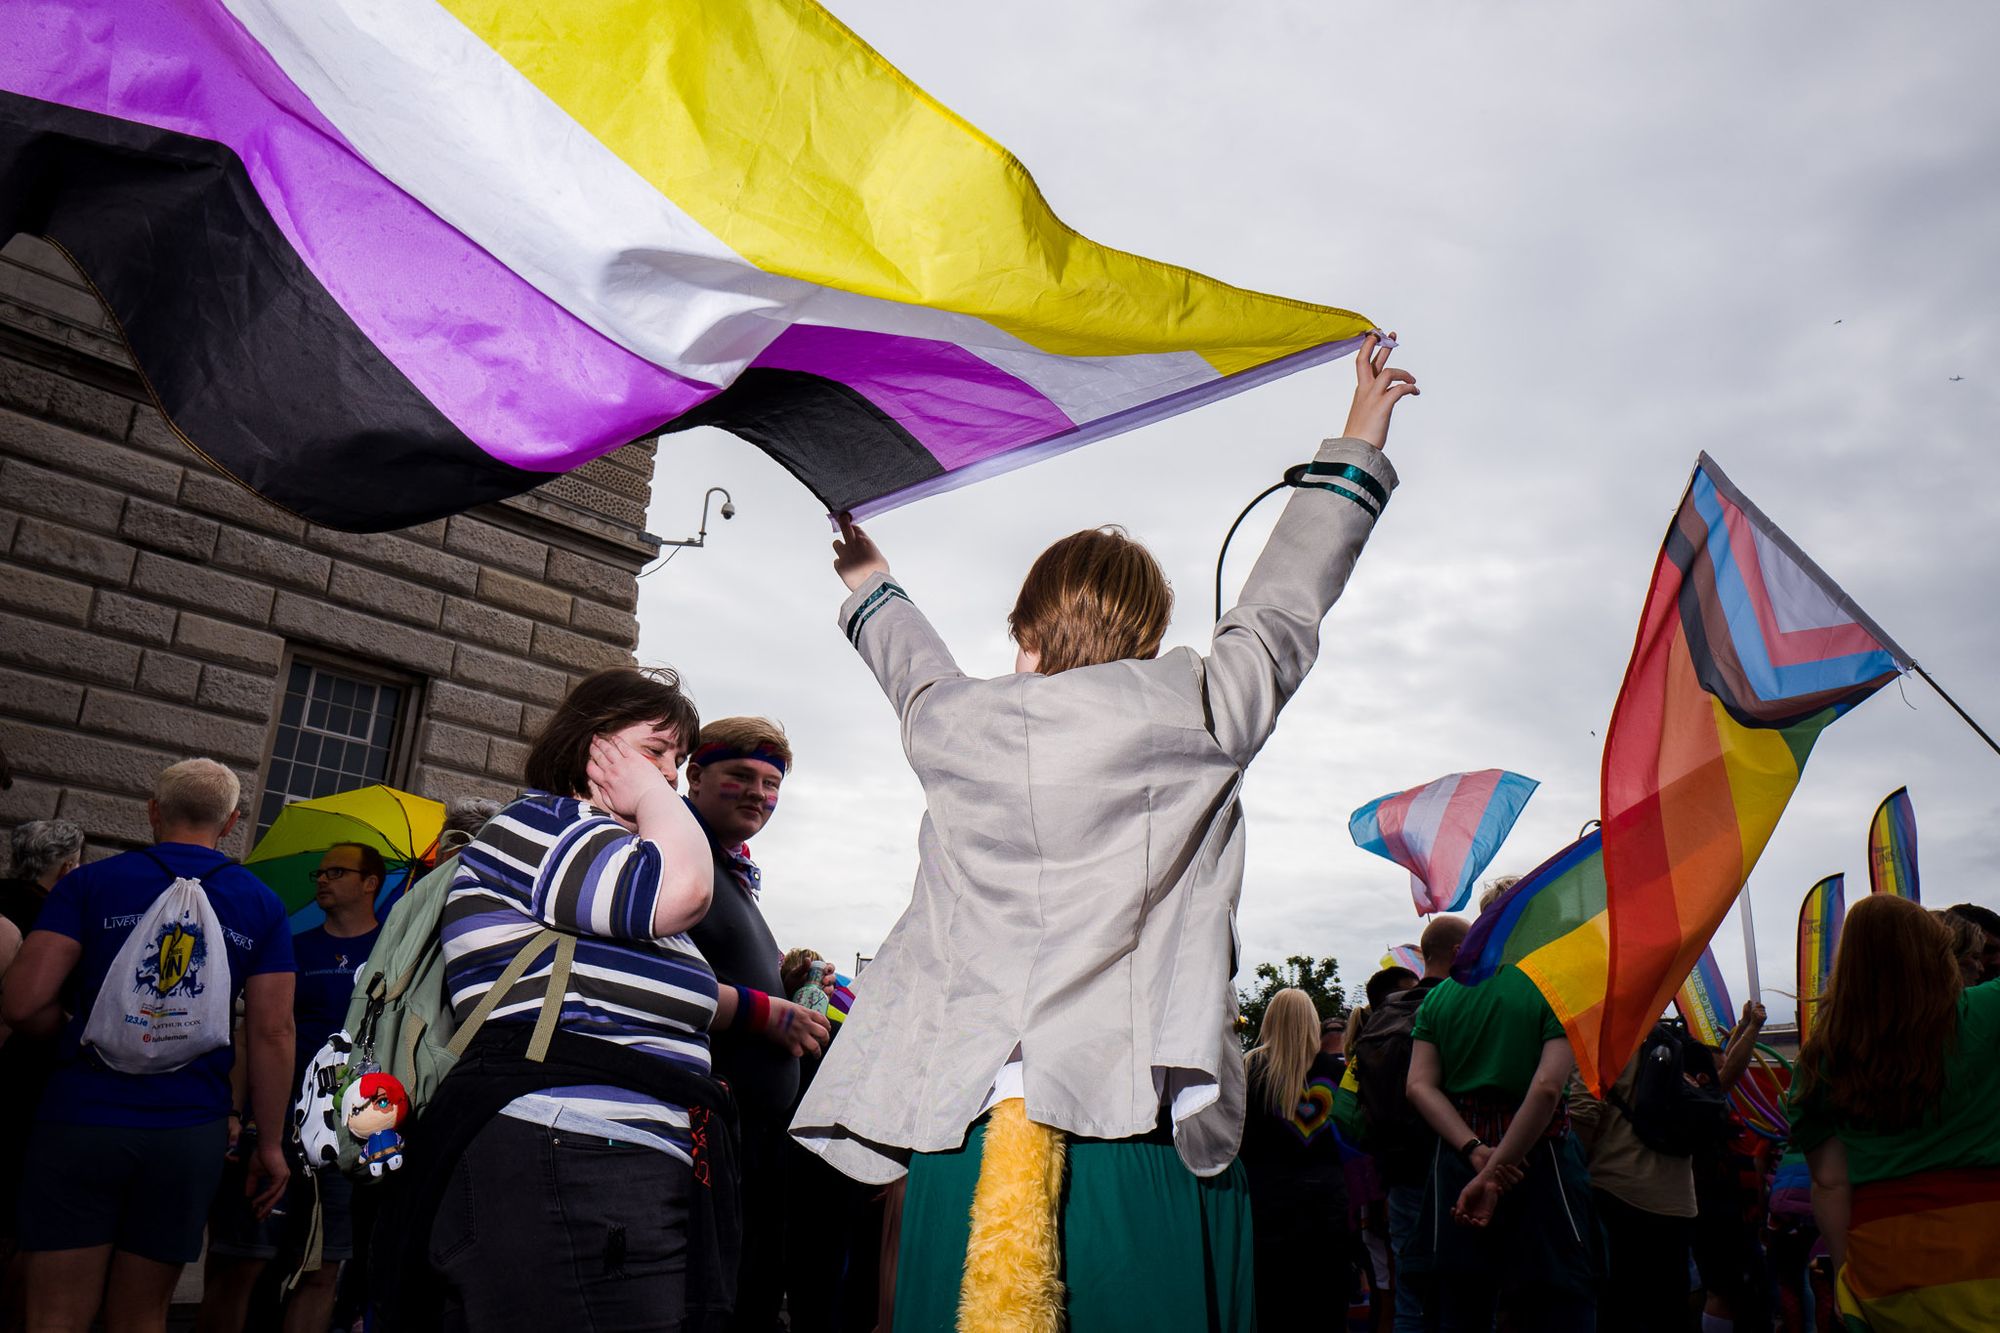 People waving various prides flags. The person closest to camera has a non-binary flag and a yellow tail.